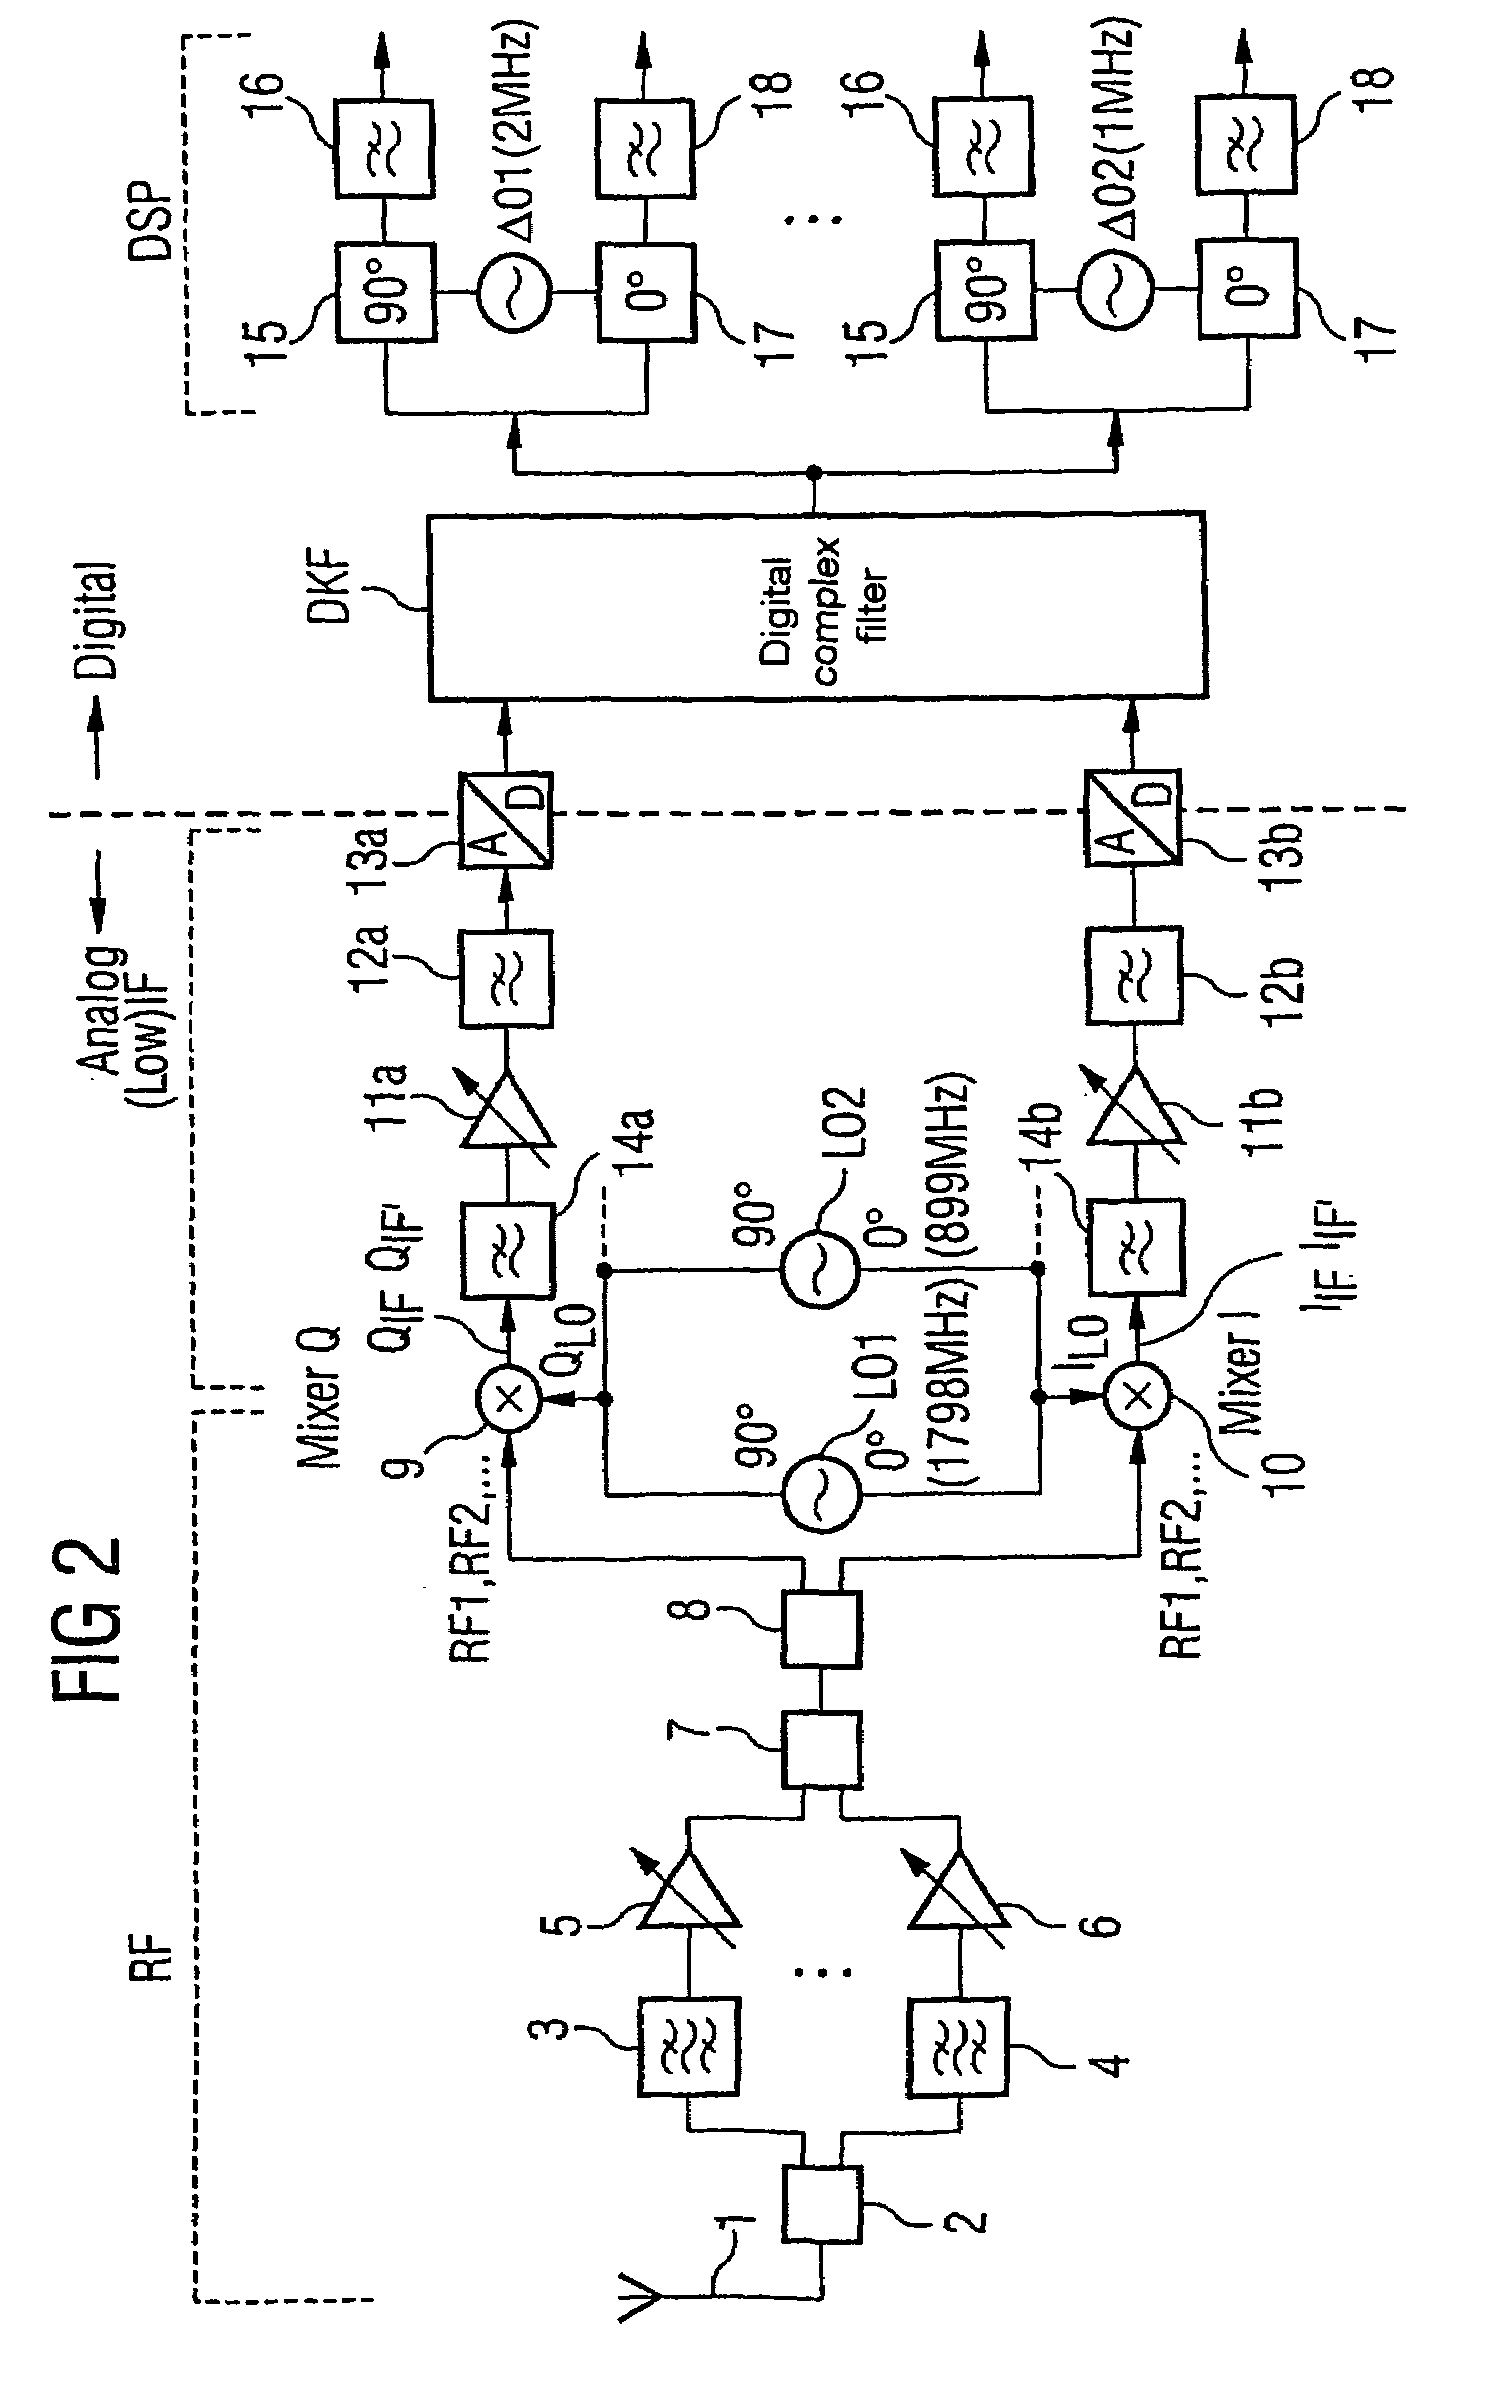 Multiband receiver and method associated therewith